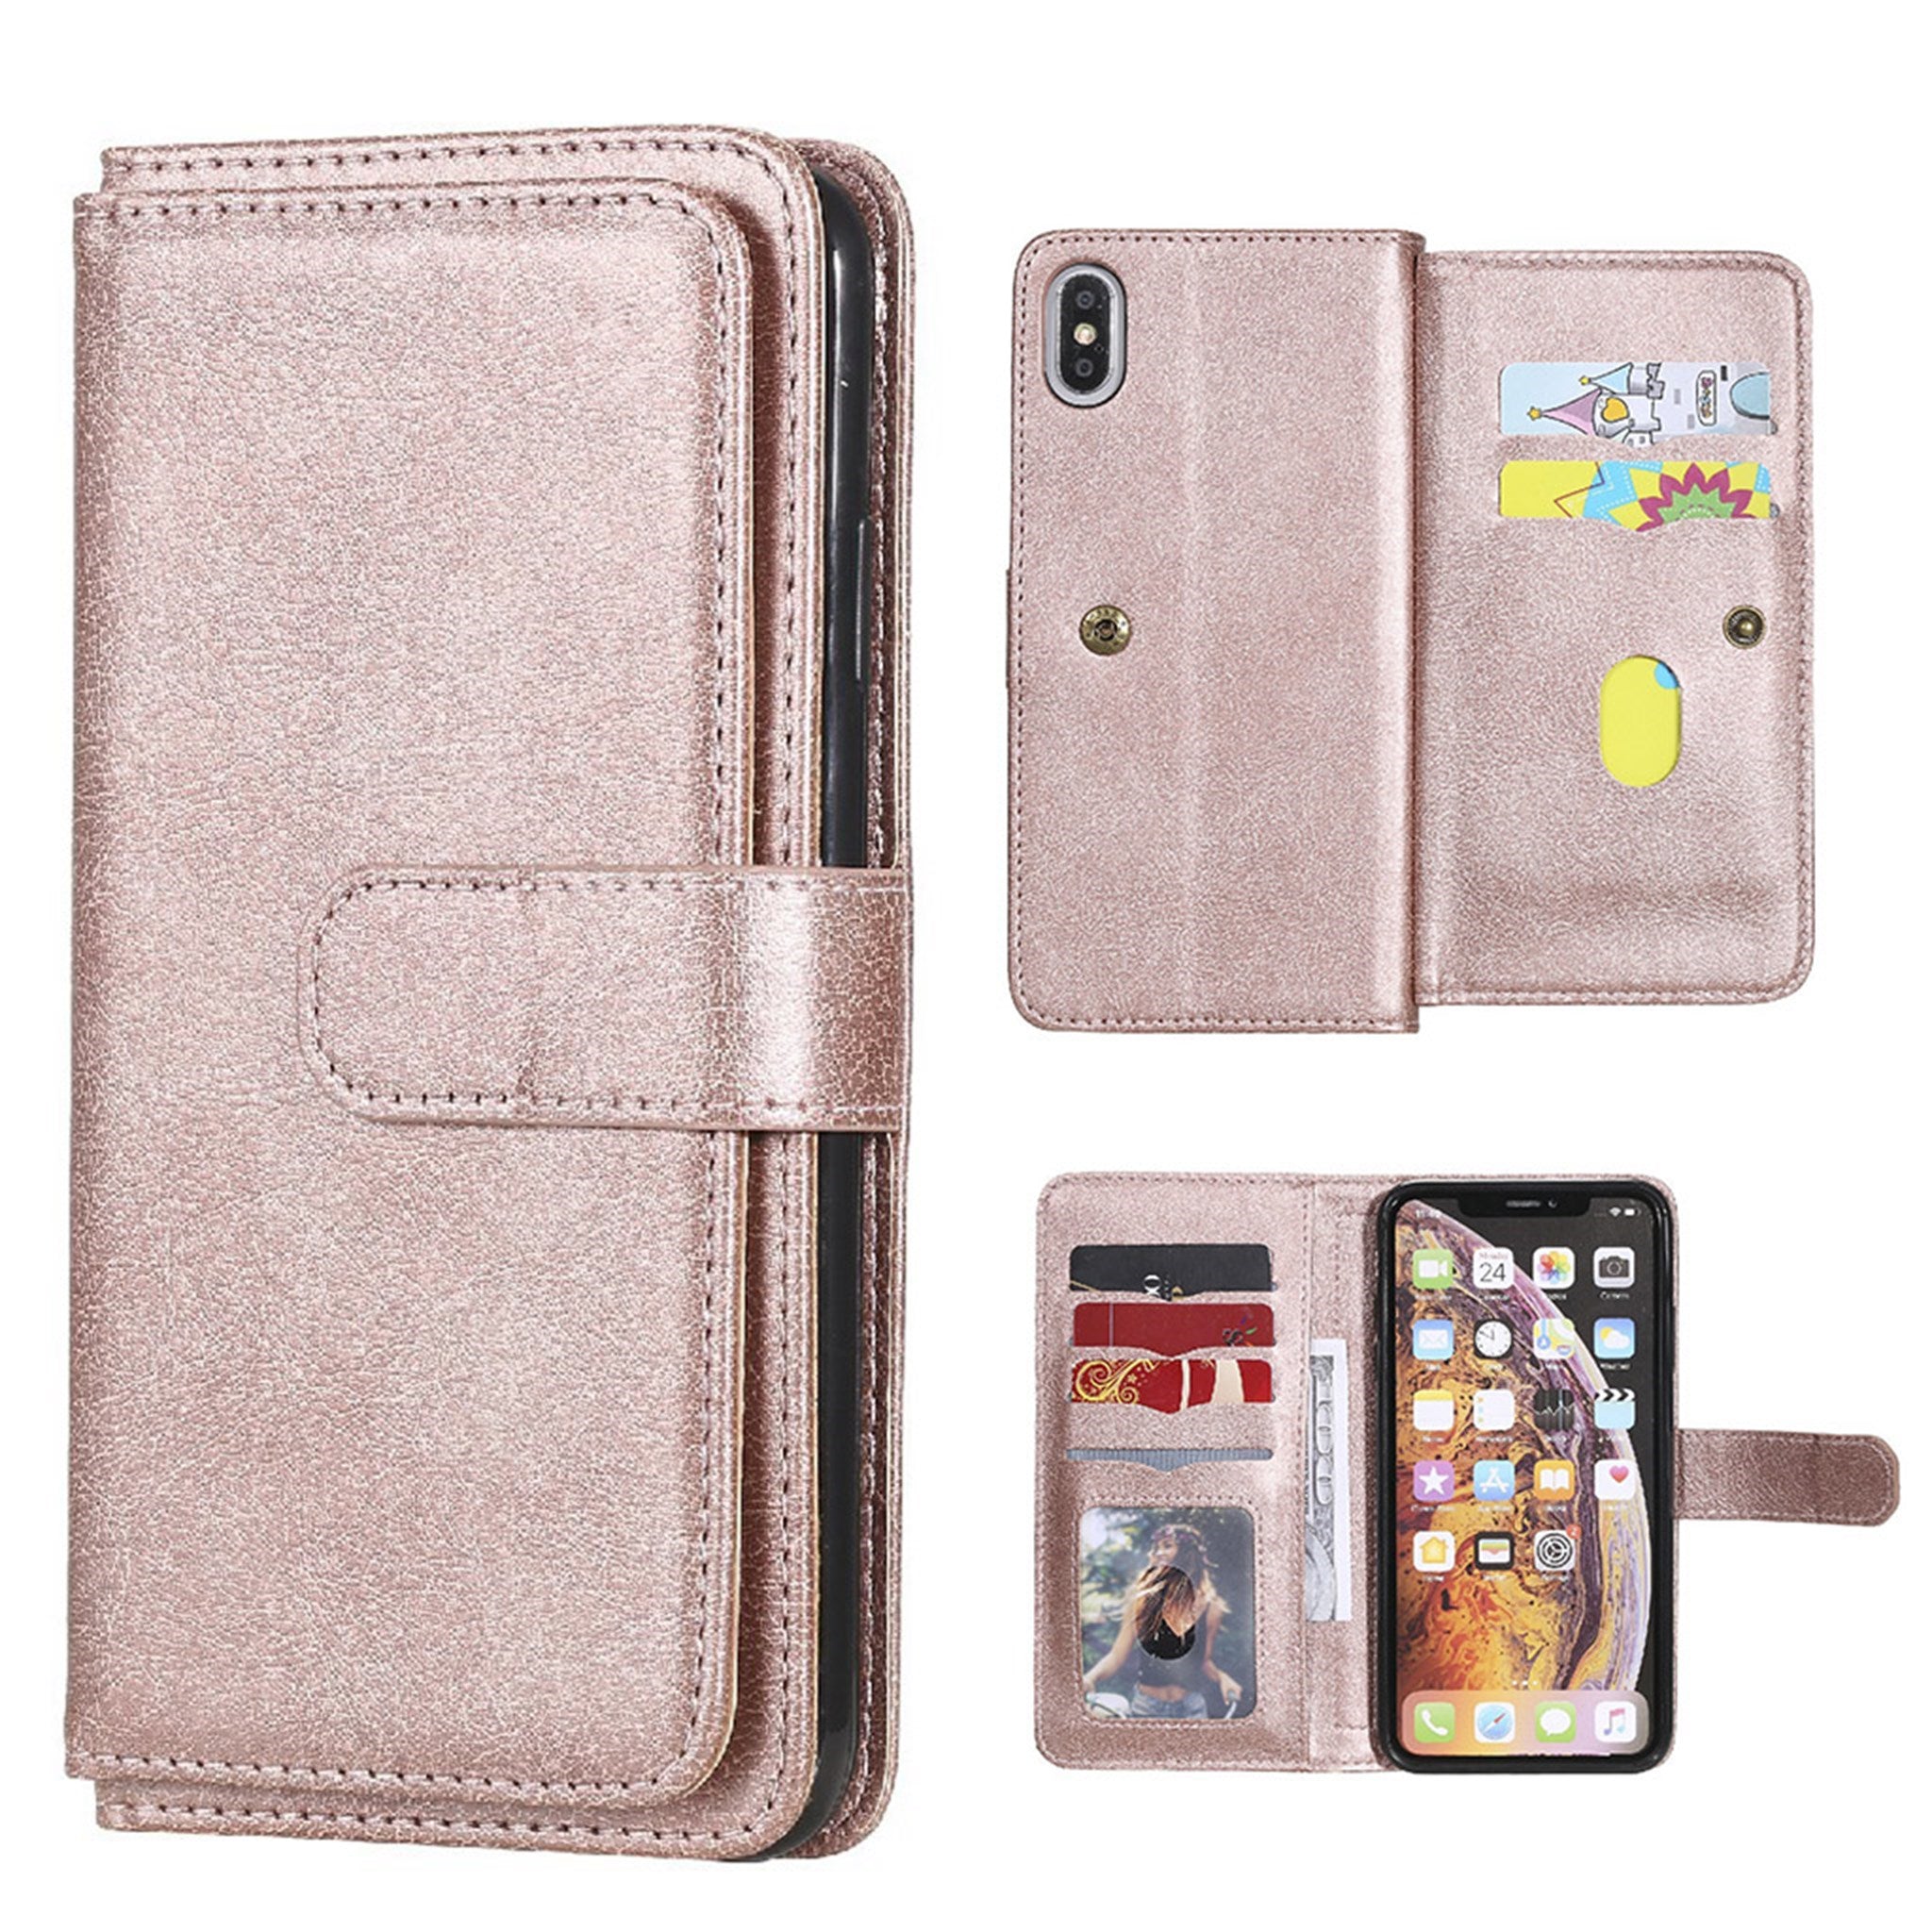 10-slot wallet case for iPhone Xs Max - Rose Gold